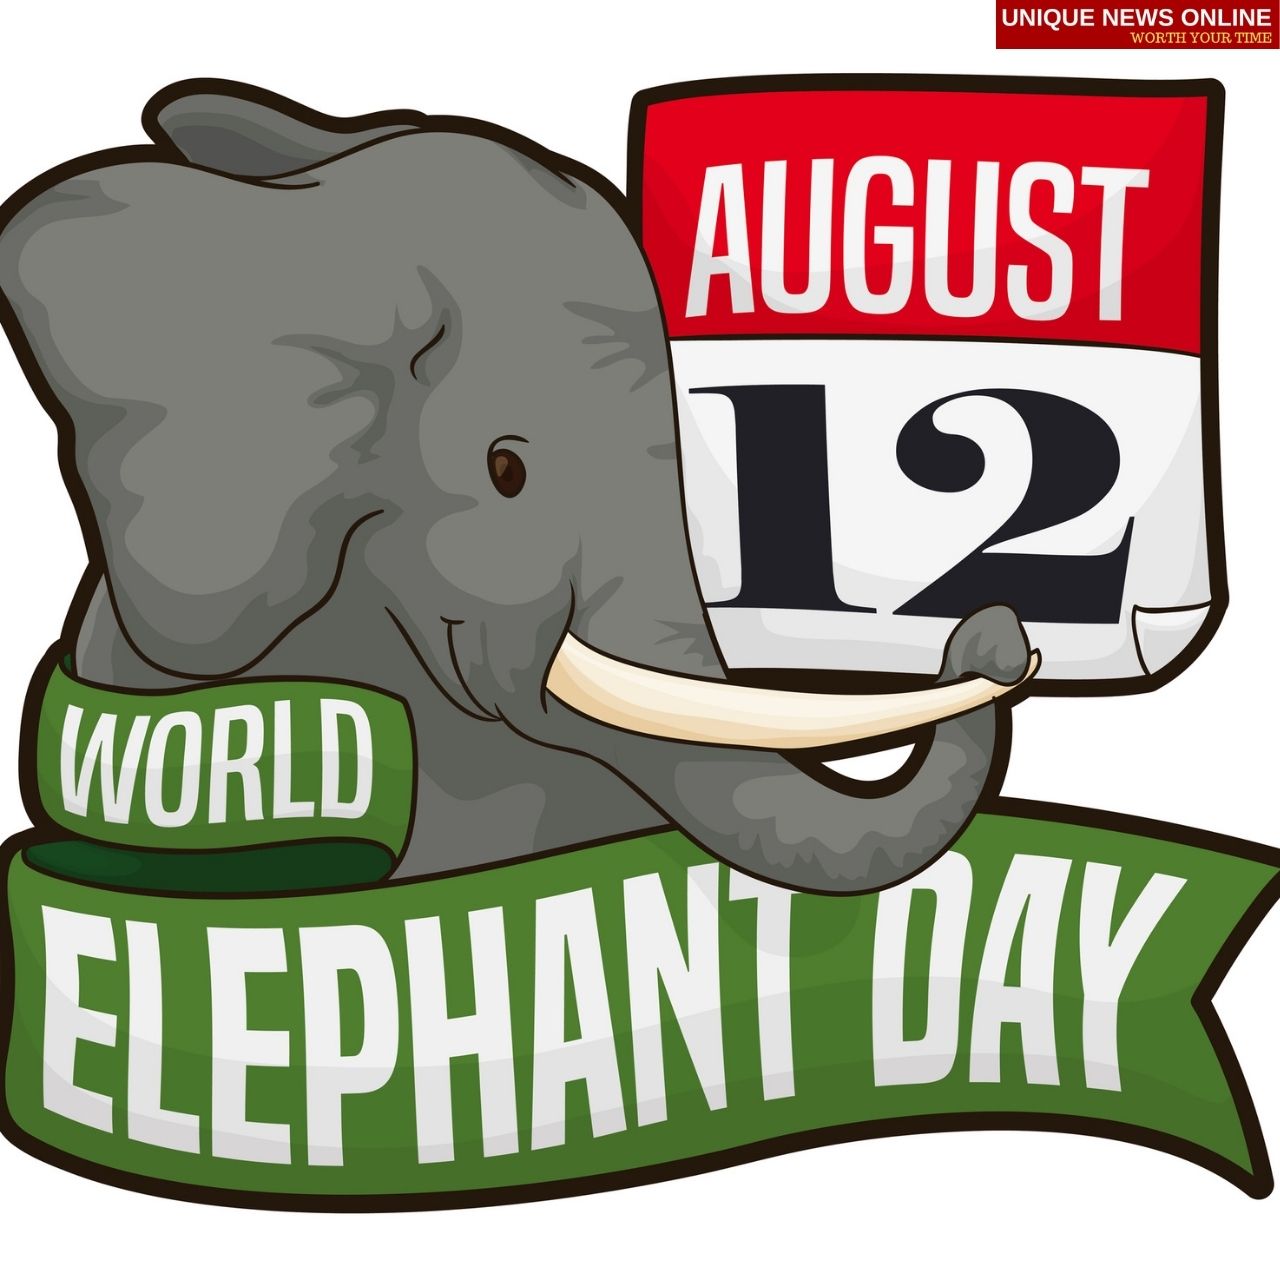 World Elephant Day 2021 Theme, Quotes, Messages, Wishes, Slogans, GIf, and HD Images to create Awareness